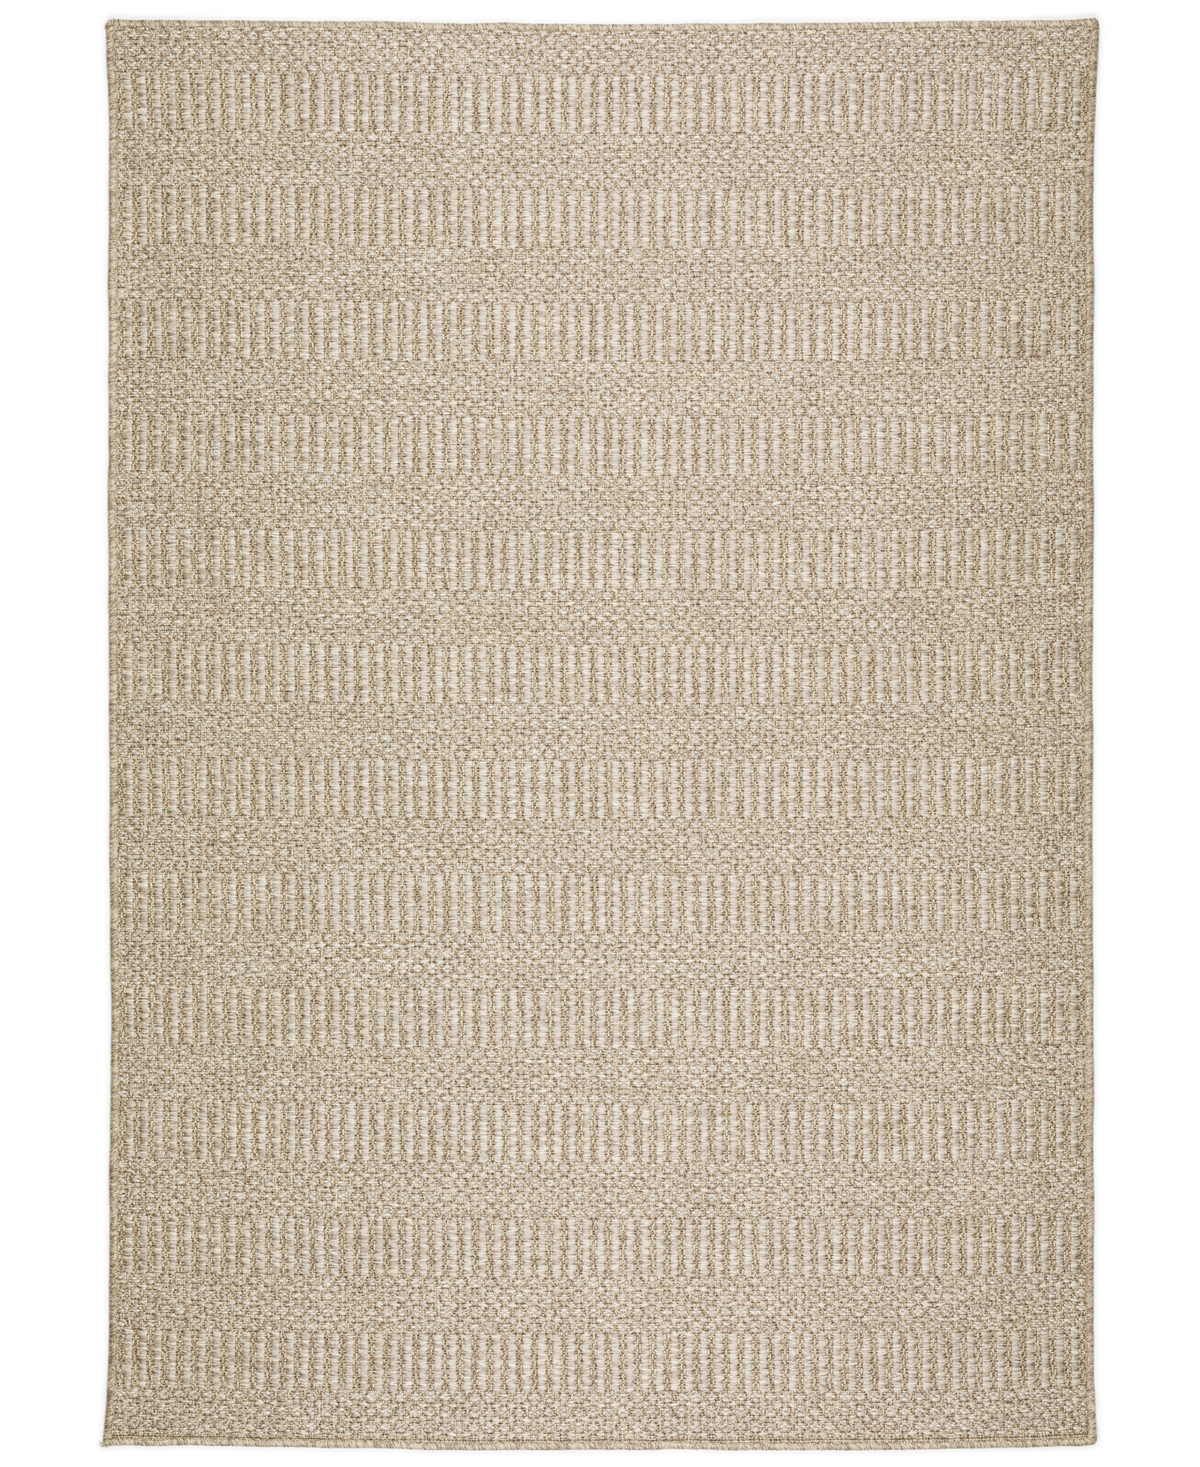 D Style Nusa Outdoor Nsa4 10' X 13' Area Rug In Beige